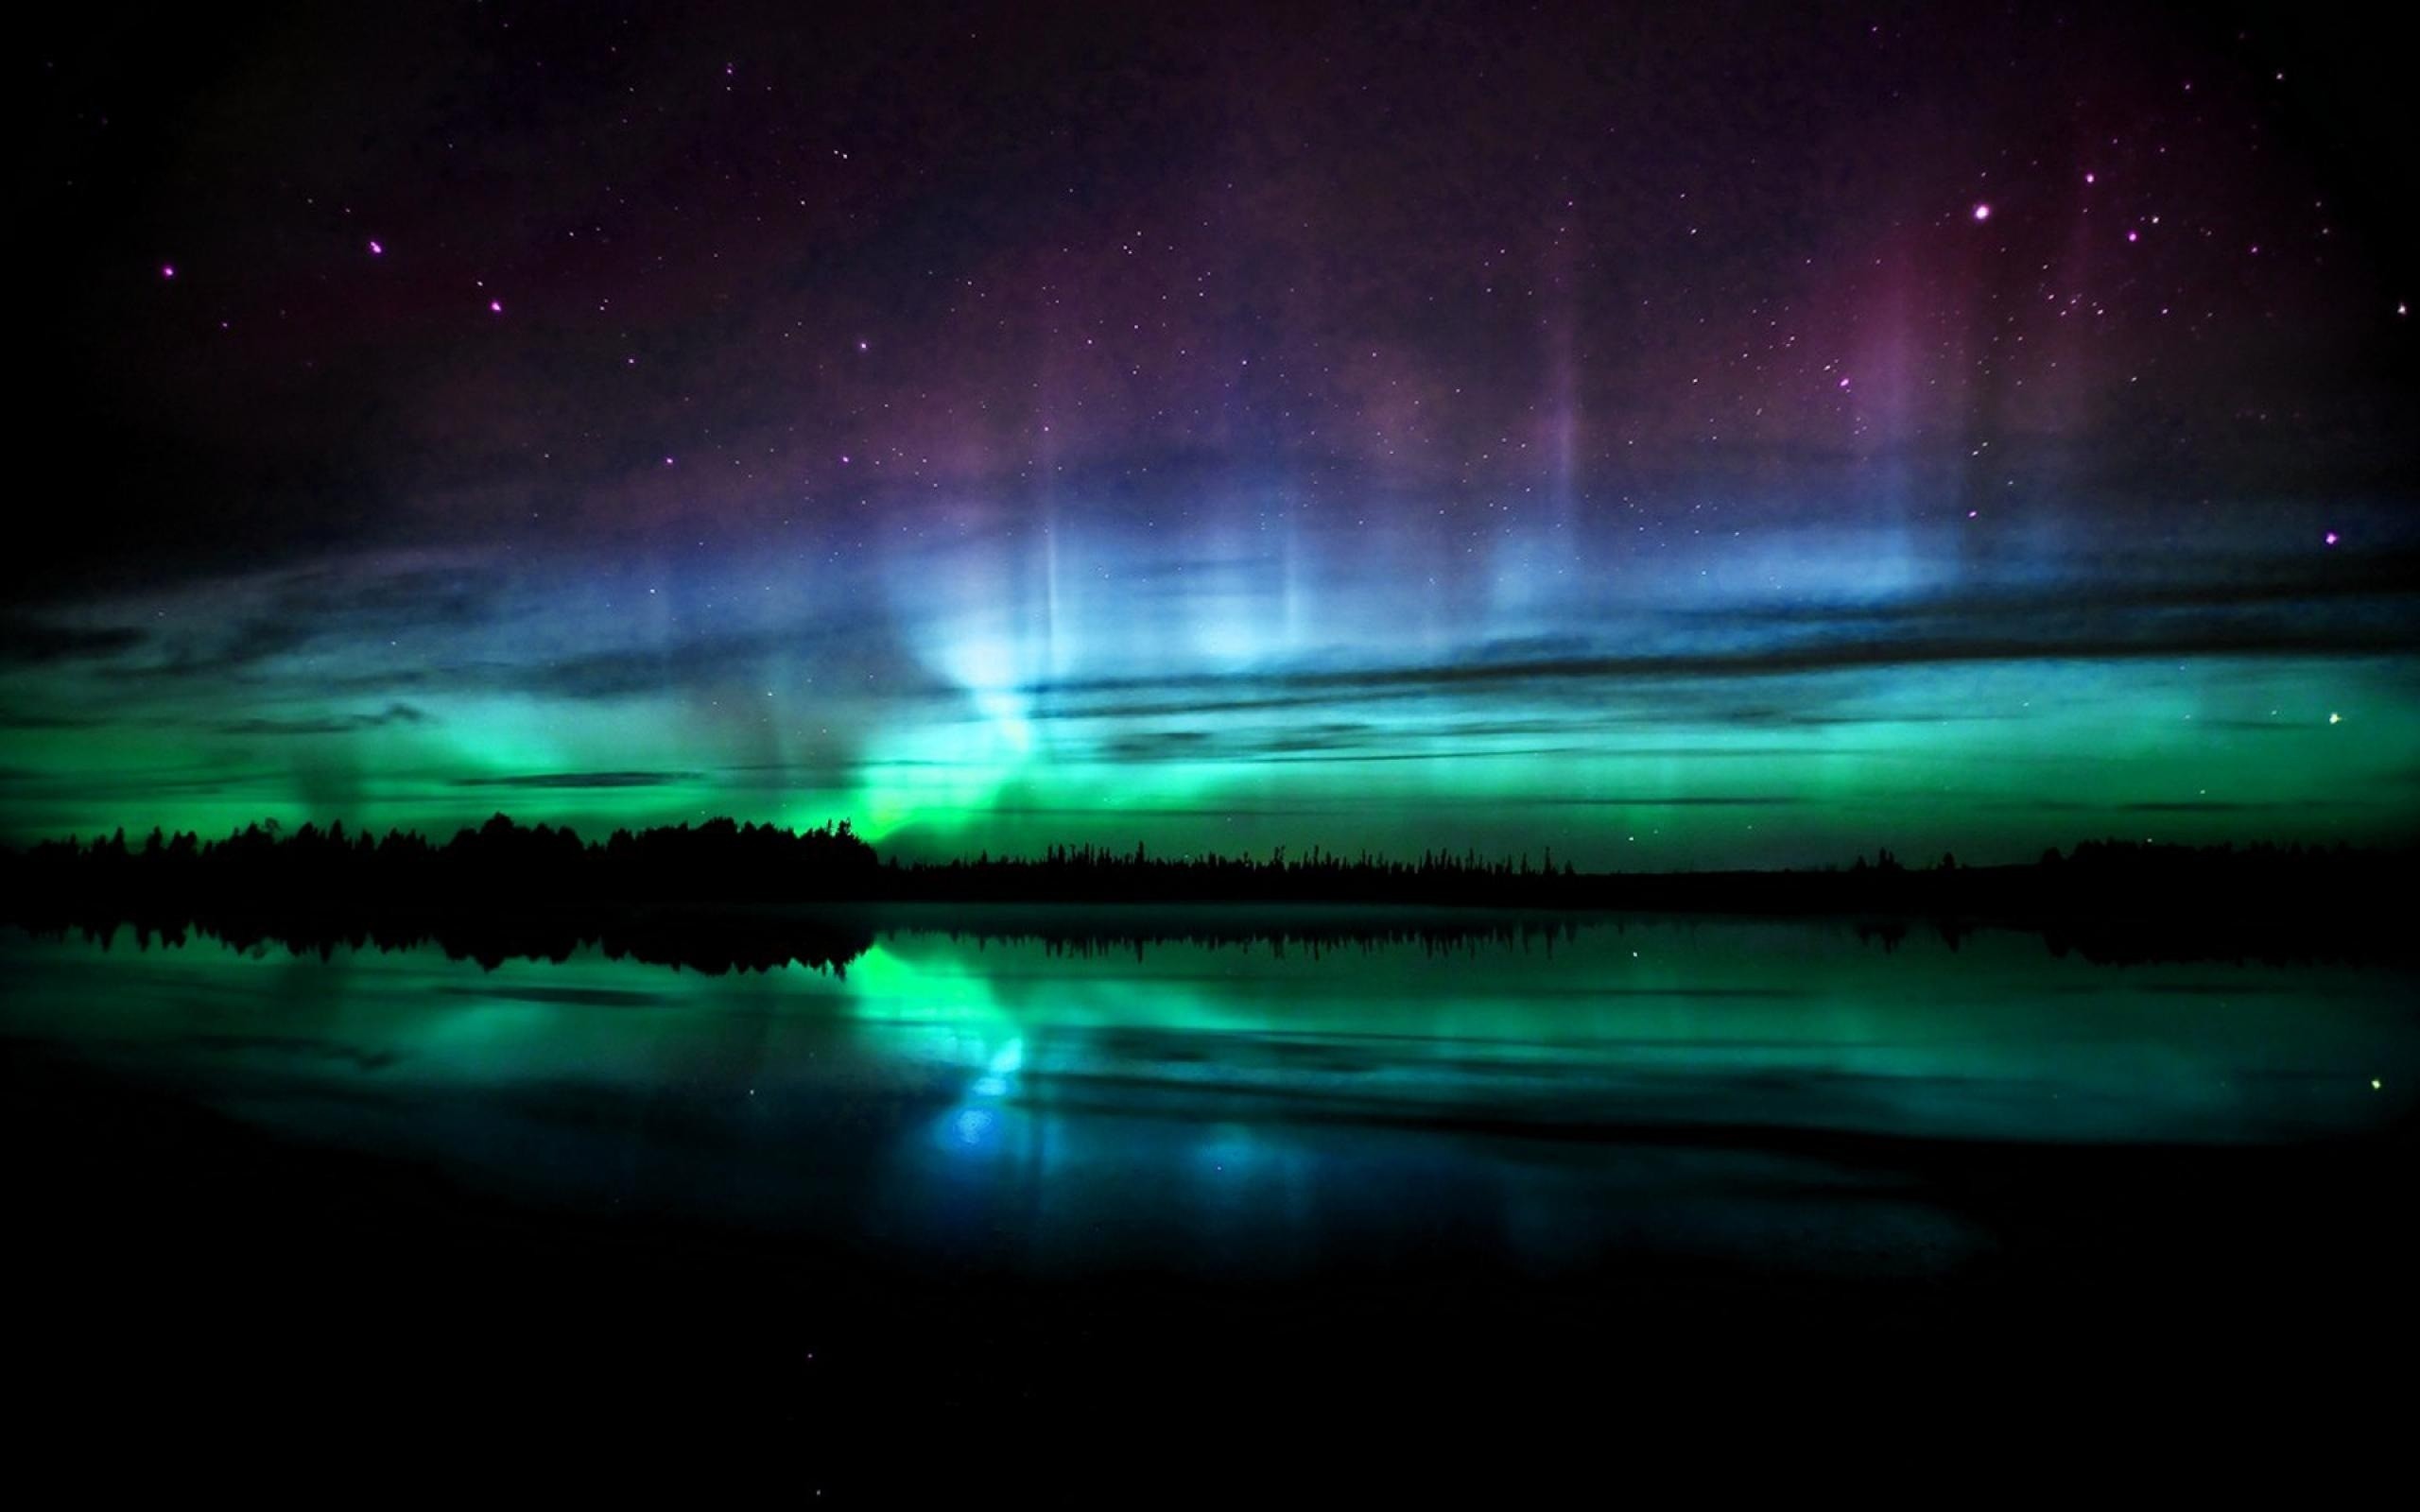 2560x1600 Title : natural wonders of the northern lights hd wallpaper (1) #16.  Dimension : 2560 x 1600. File Type : JPG/JPEG